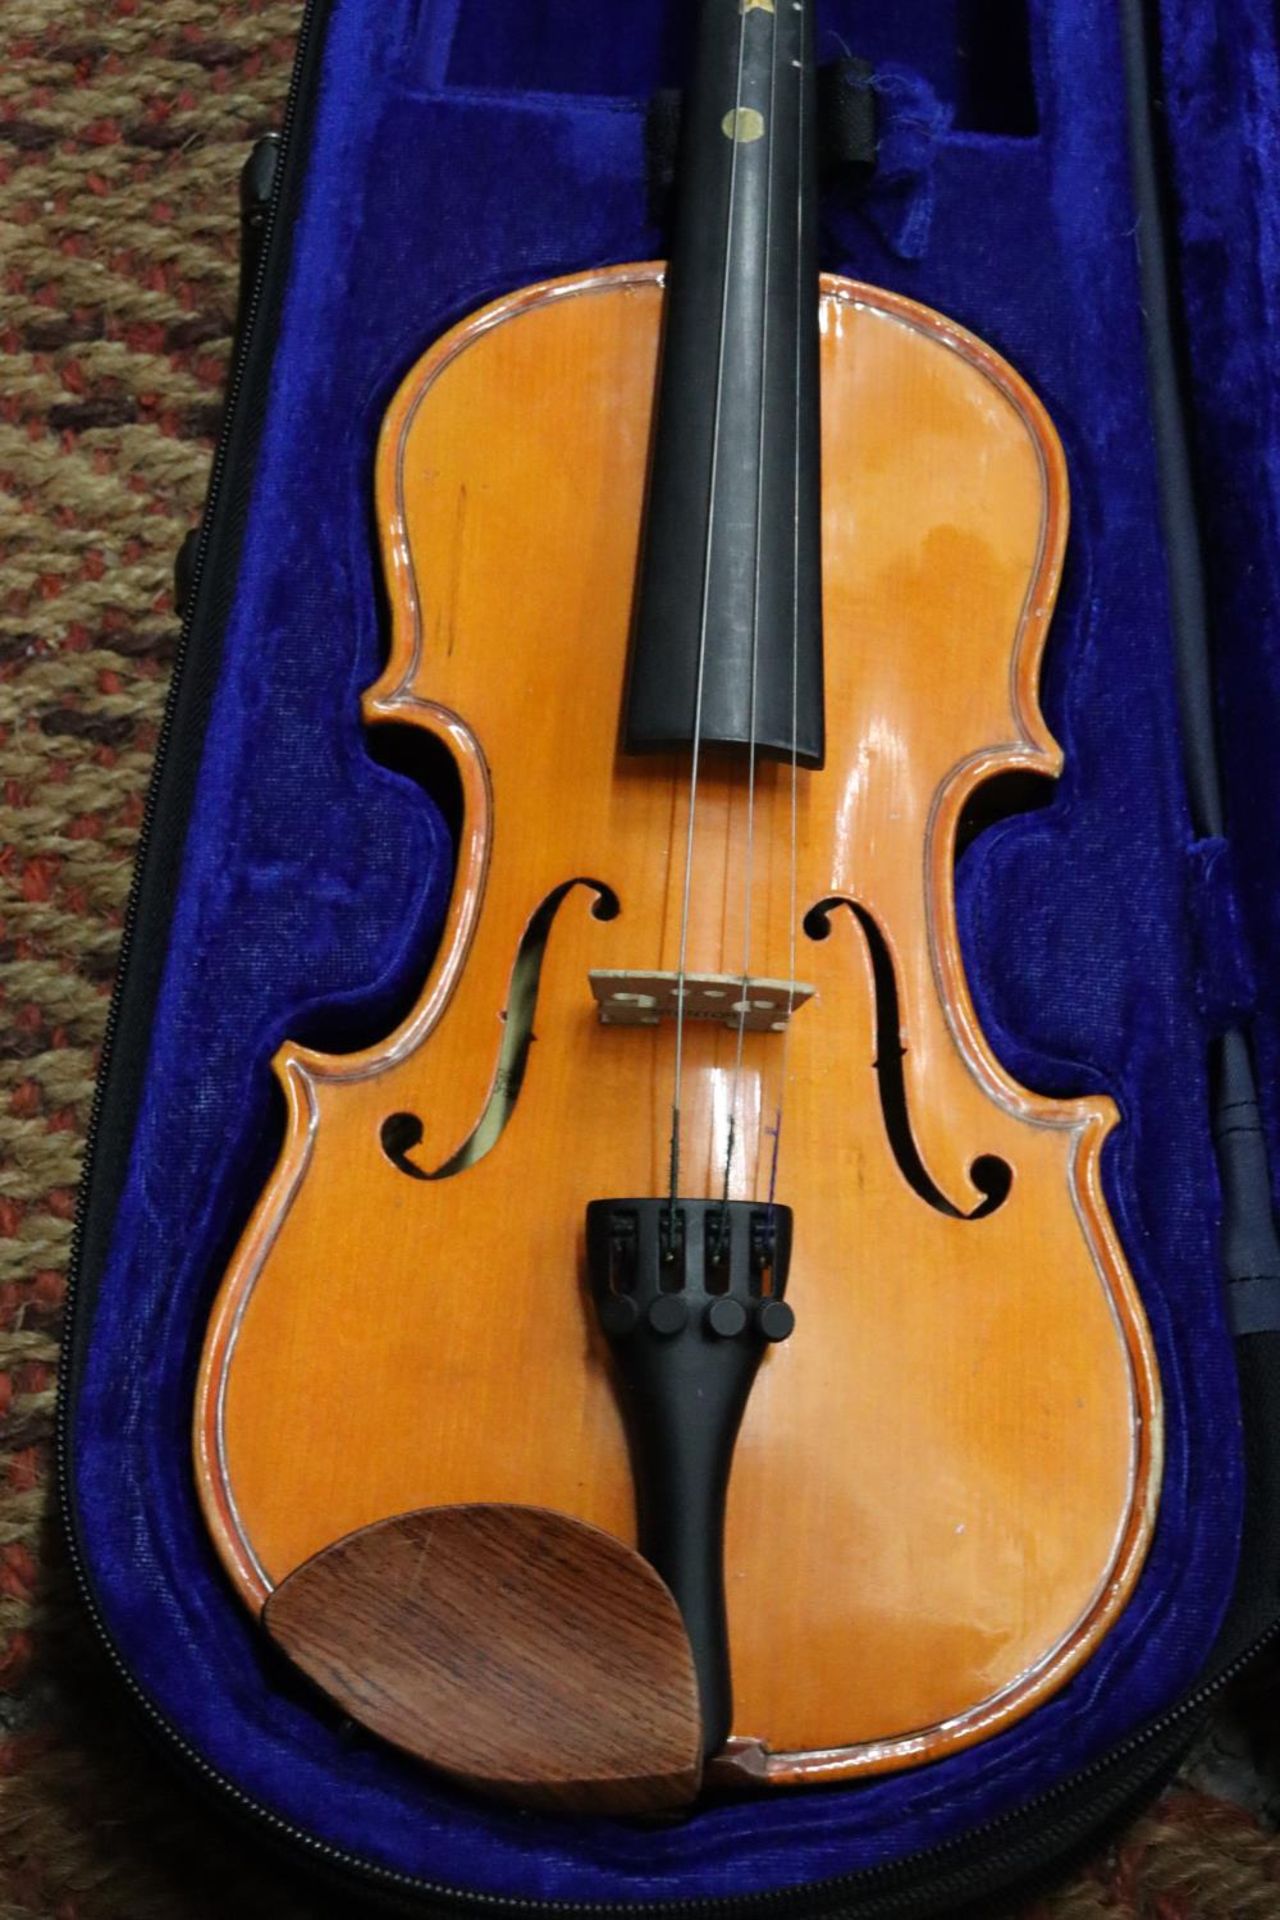 A STENTOR STUDENT 1/4 VIOLIN IN A CASE - Image 3 of 6